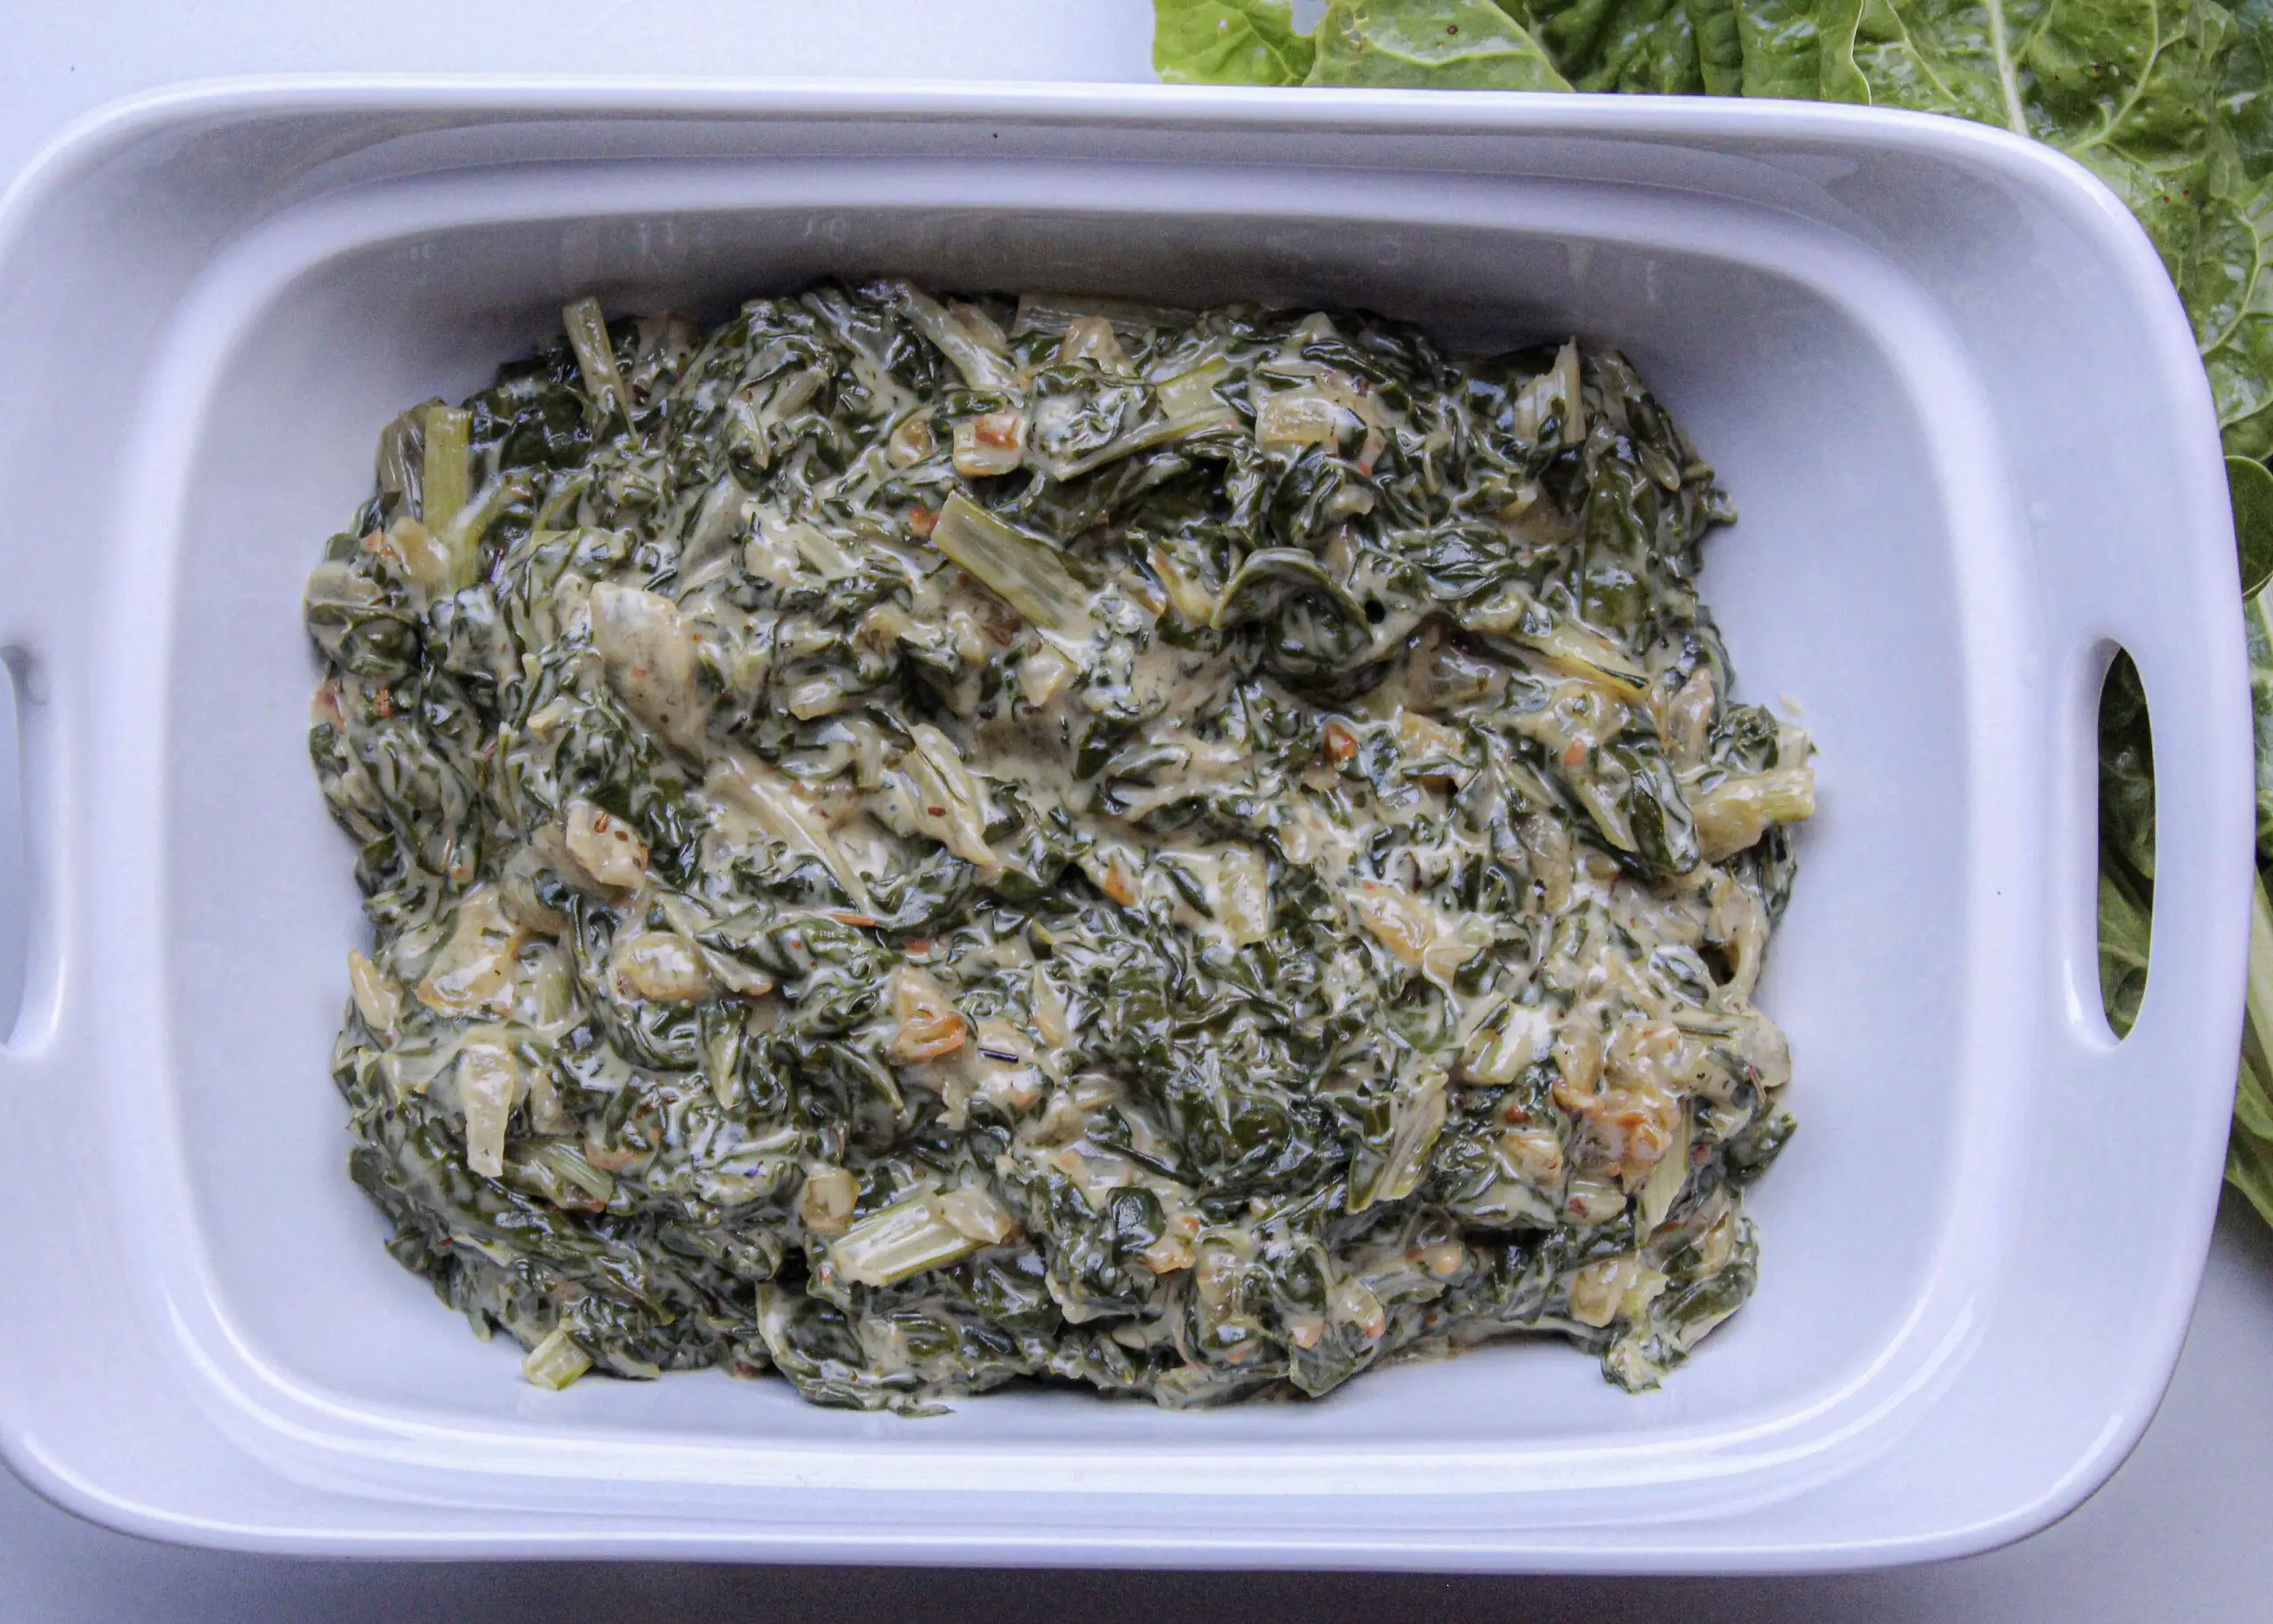 creamy spinach recipe South Africa (steakhouse style)